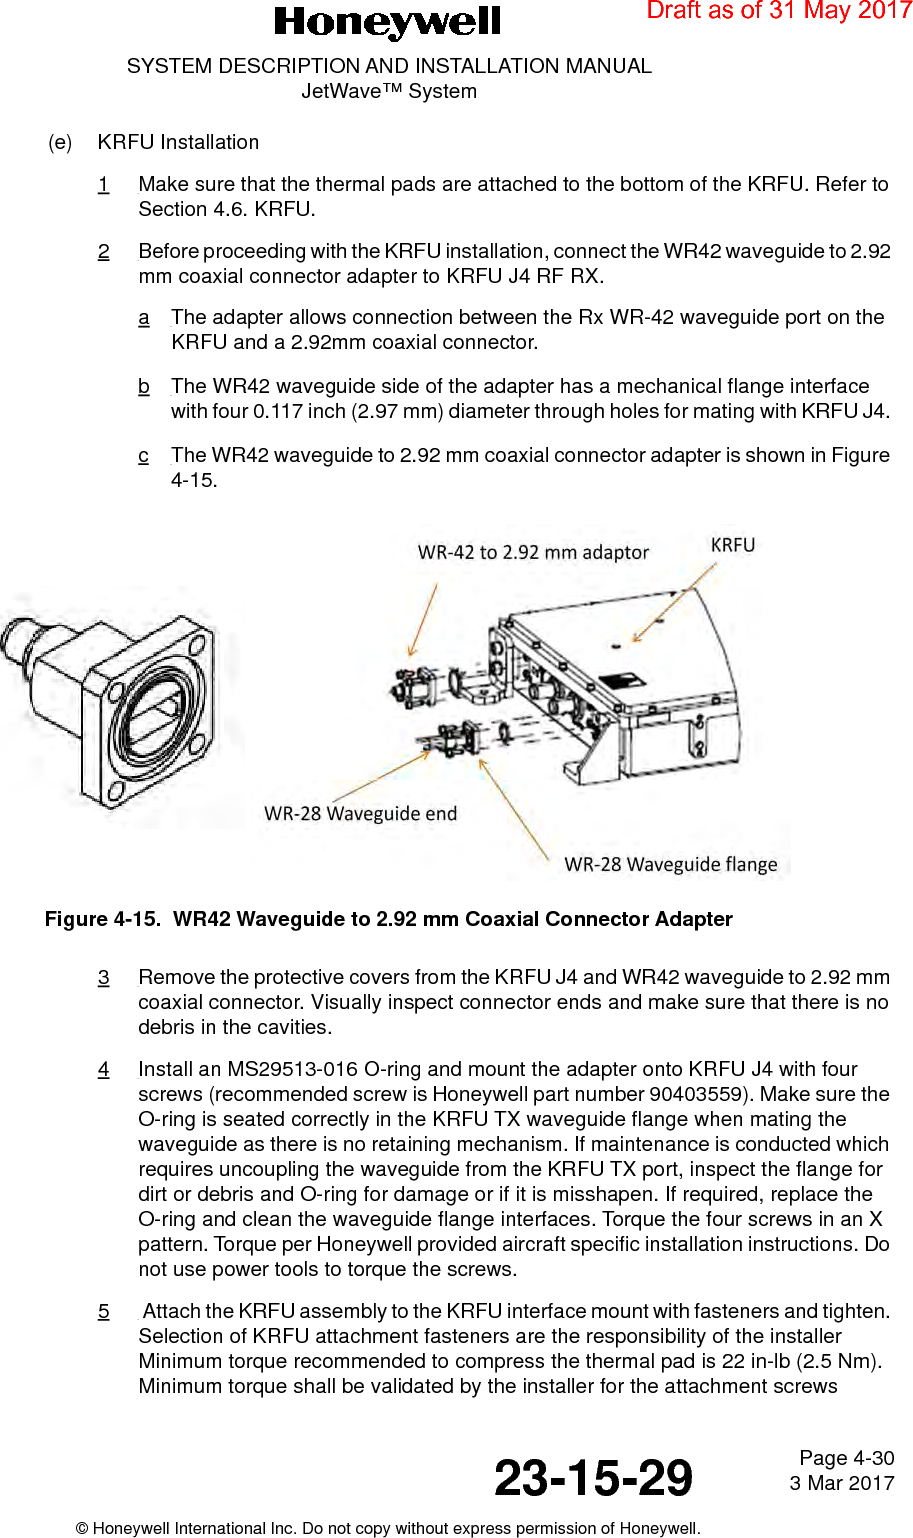 Page 4-30 3 Mar 201723-15-29SYSTEM DESCRIPTION AND INSTALLATION MANUALJetWave™ System© Honeywell International Inc. Do not copy without express permission of Honeywell.(e) KRFU Installation 1Make sure that the thermal pads are attached to the bottom of the KRFU. Refer to Section 4.6. KRFU.2Before proceeding with the KRFU installation, connect the WR42 waveguide to 2.92 mm coaxial connector adapter to KRFU J4 RF RX. aThe adapter allows connection between the Rx WR-42 waveguide port on the KRFU and a 2.92mm coaxial connector.bThe WR42 waveguide side of the adapter has a mechanical flange interface with four 0.117 inch (2.97 mm) diameter through holes for mating with KRFU J4. cThe WR42 waveguide to 2.92 mm coaxial connector adapter is shown in Figure 4-15. Figure 4-15.  WR42 Waveguide to 2.92 mm Coaxial Connector Adapter3Remove the protective covers from the KRFU J4 and WR42 waveguide to 2.92 mm coaxial connector. Visually inspect connector ends and make sure that there is no debris in the cavities. 4Install an MS29513-016 O-ring and mount the adapter onto KRFU J4 with four screws (recommended screw is Honeywell part number 90403559). Make sure the O-ring is seated correctly in the KRFU TX waveguide flange when mating the waveguide as there is no retaining mechanism. If maintenance is conducted which requires uncoupling the waveguide from the KRFU TX port, inspect the flange for dirt or debris and O-ring for damage or if it is misshapen. If required, replace the O-ring and clean the waveguide flange interfaces. Torque the four screws in an X pattern. Torque per Honeywell provided aircraft specific installation instructions. Do not use power tools to torque the screws.5 Attach the KRFU assembly to the KRFU interface mount with fasteners and tighten. Selection of KRFU attachment fasteners are the responsibility of the installer Minimum torque recommended to compress the thermal pad is 22 in-lb (2.5 Nm). Minimum torque shall be validated by the installer for the attachment screws  Draft as of 31 May 2017